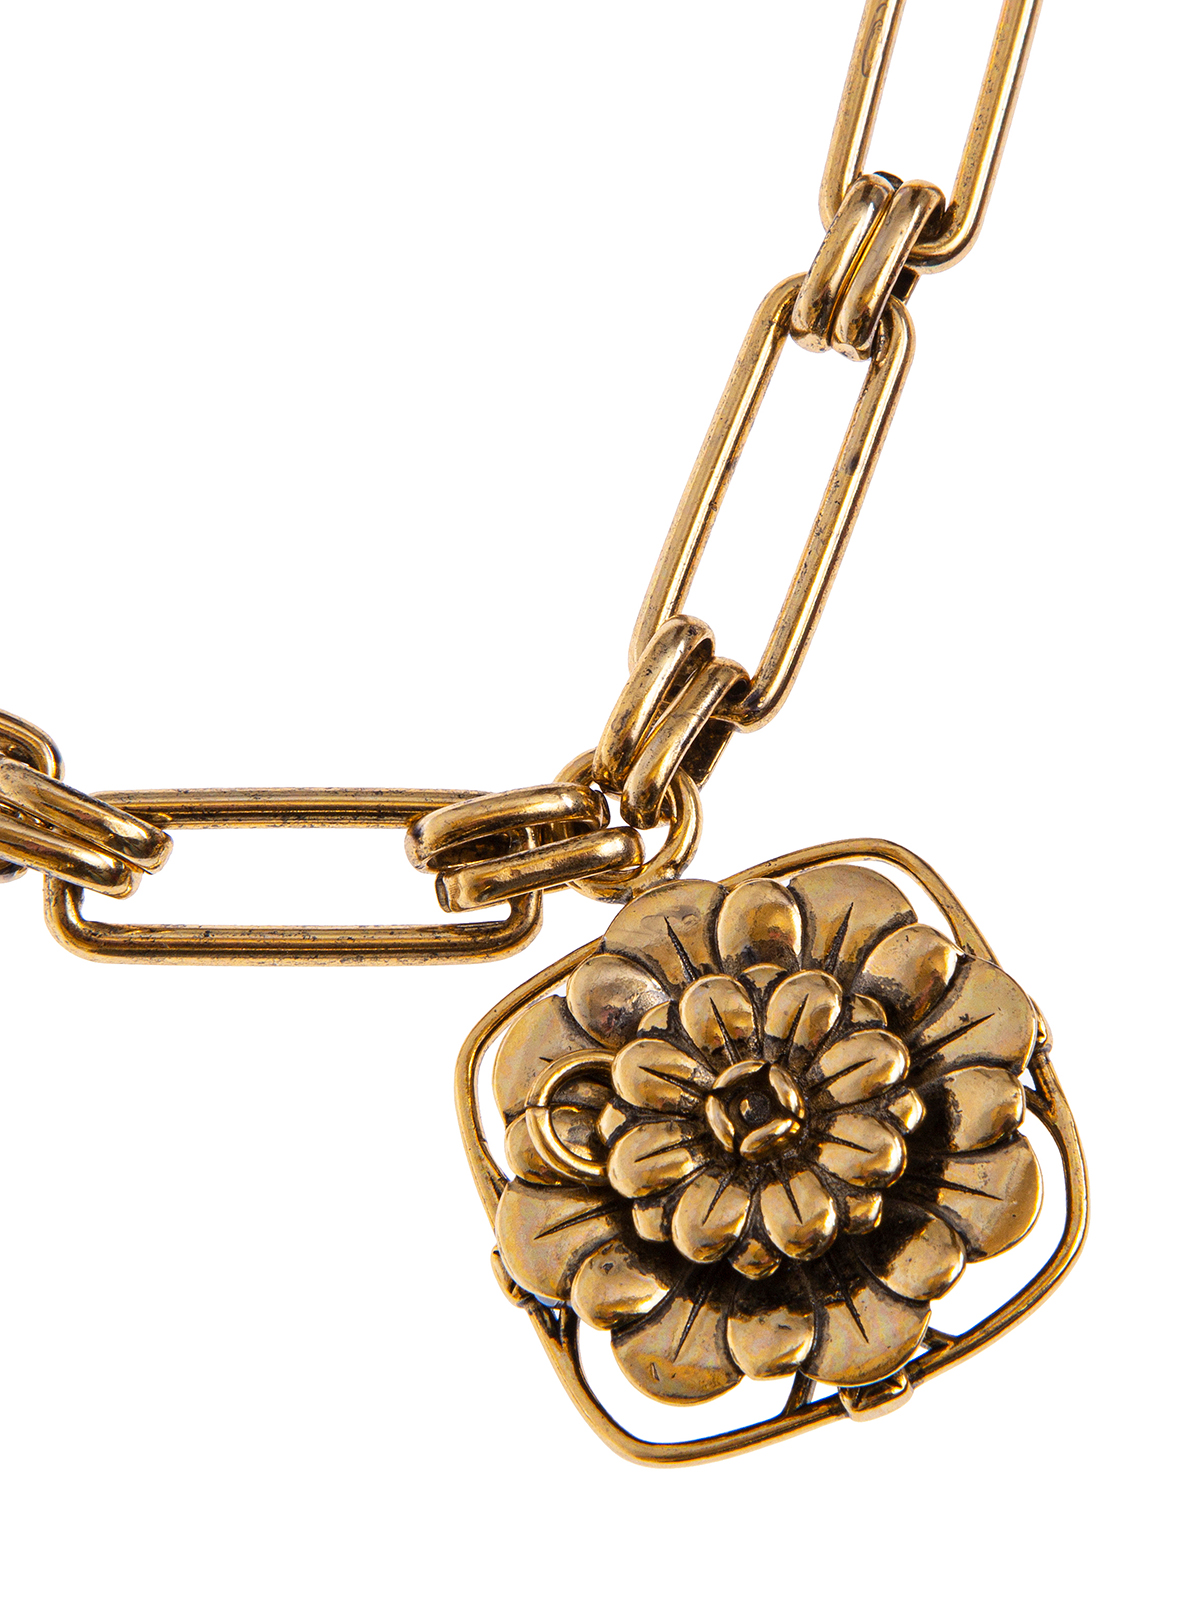 Mixed chain necklace with metal flower charm